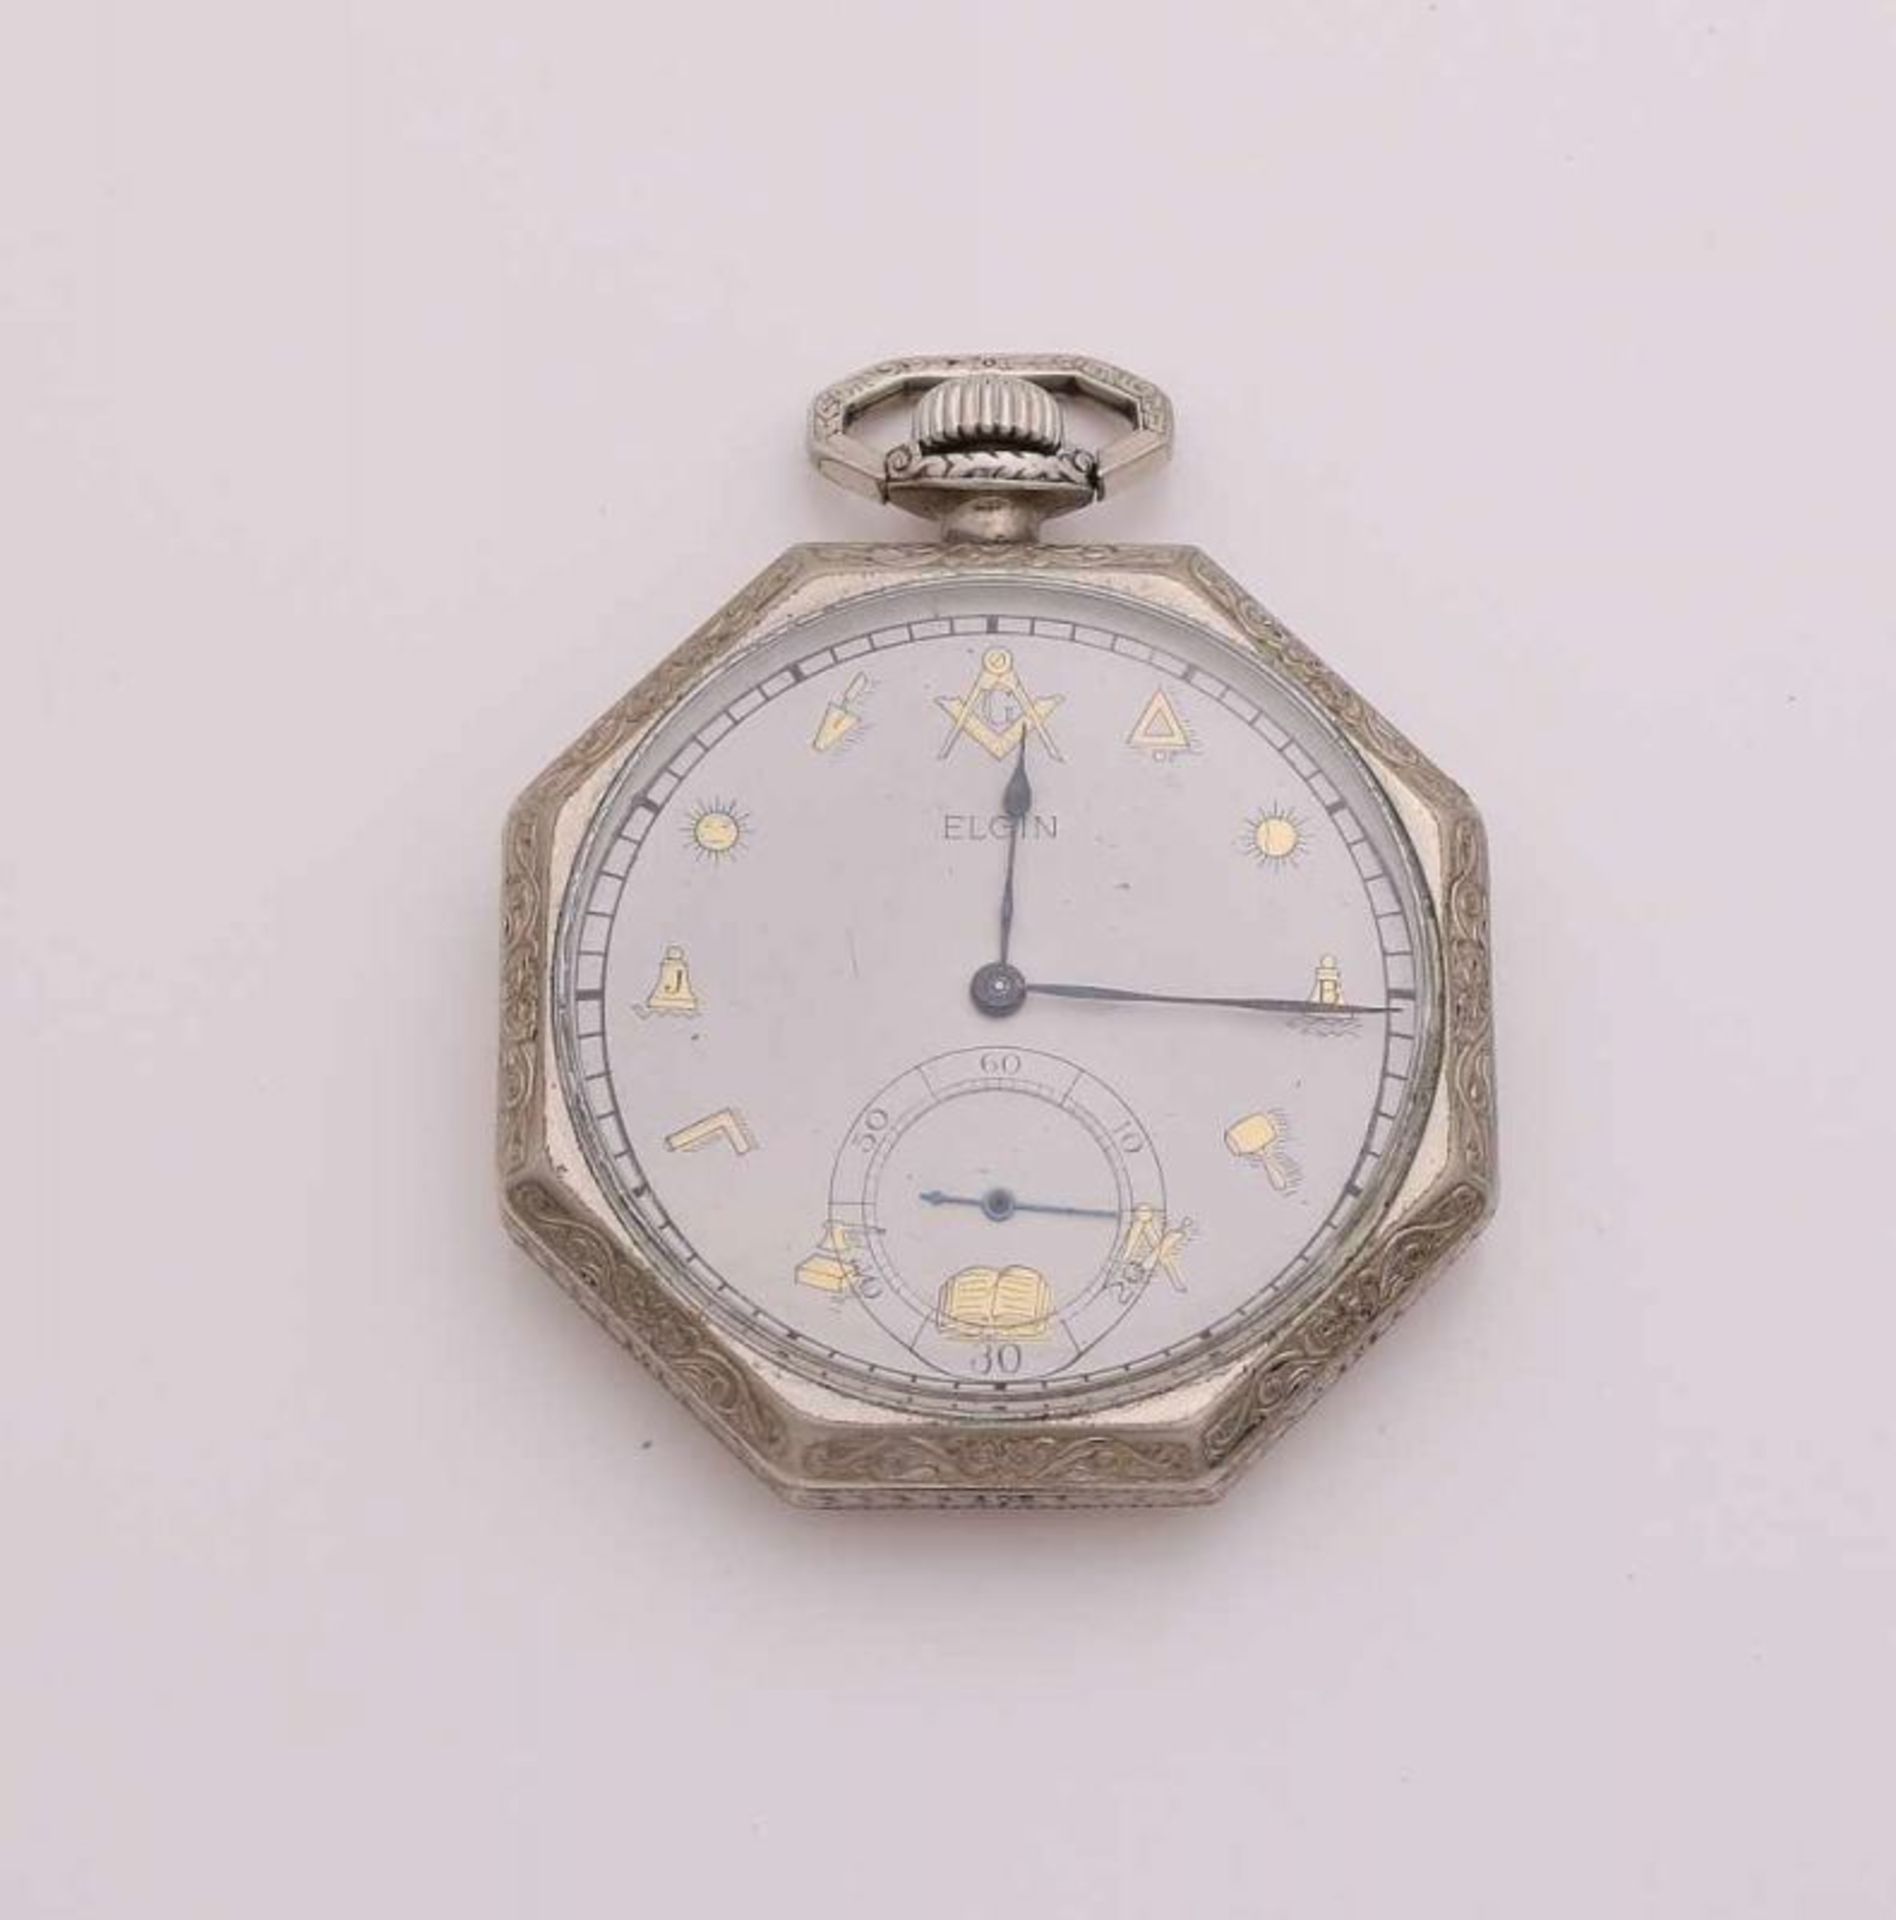 Elgin goldfilled pocket watch, octagonal with a flower-worked border. The dial is decorated with